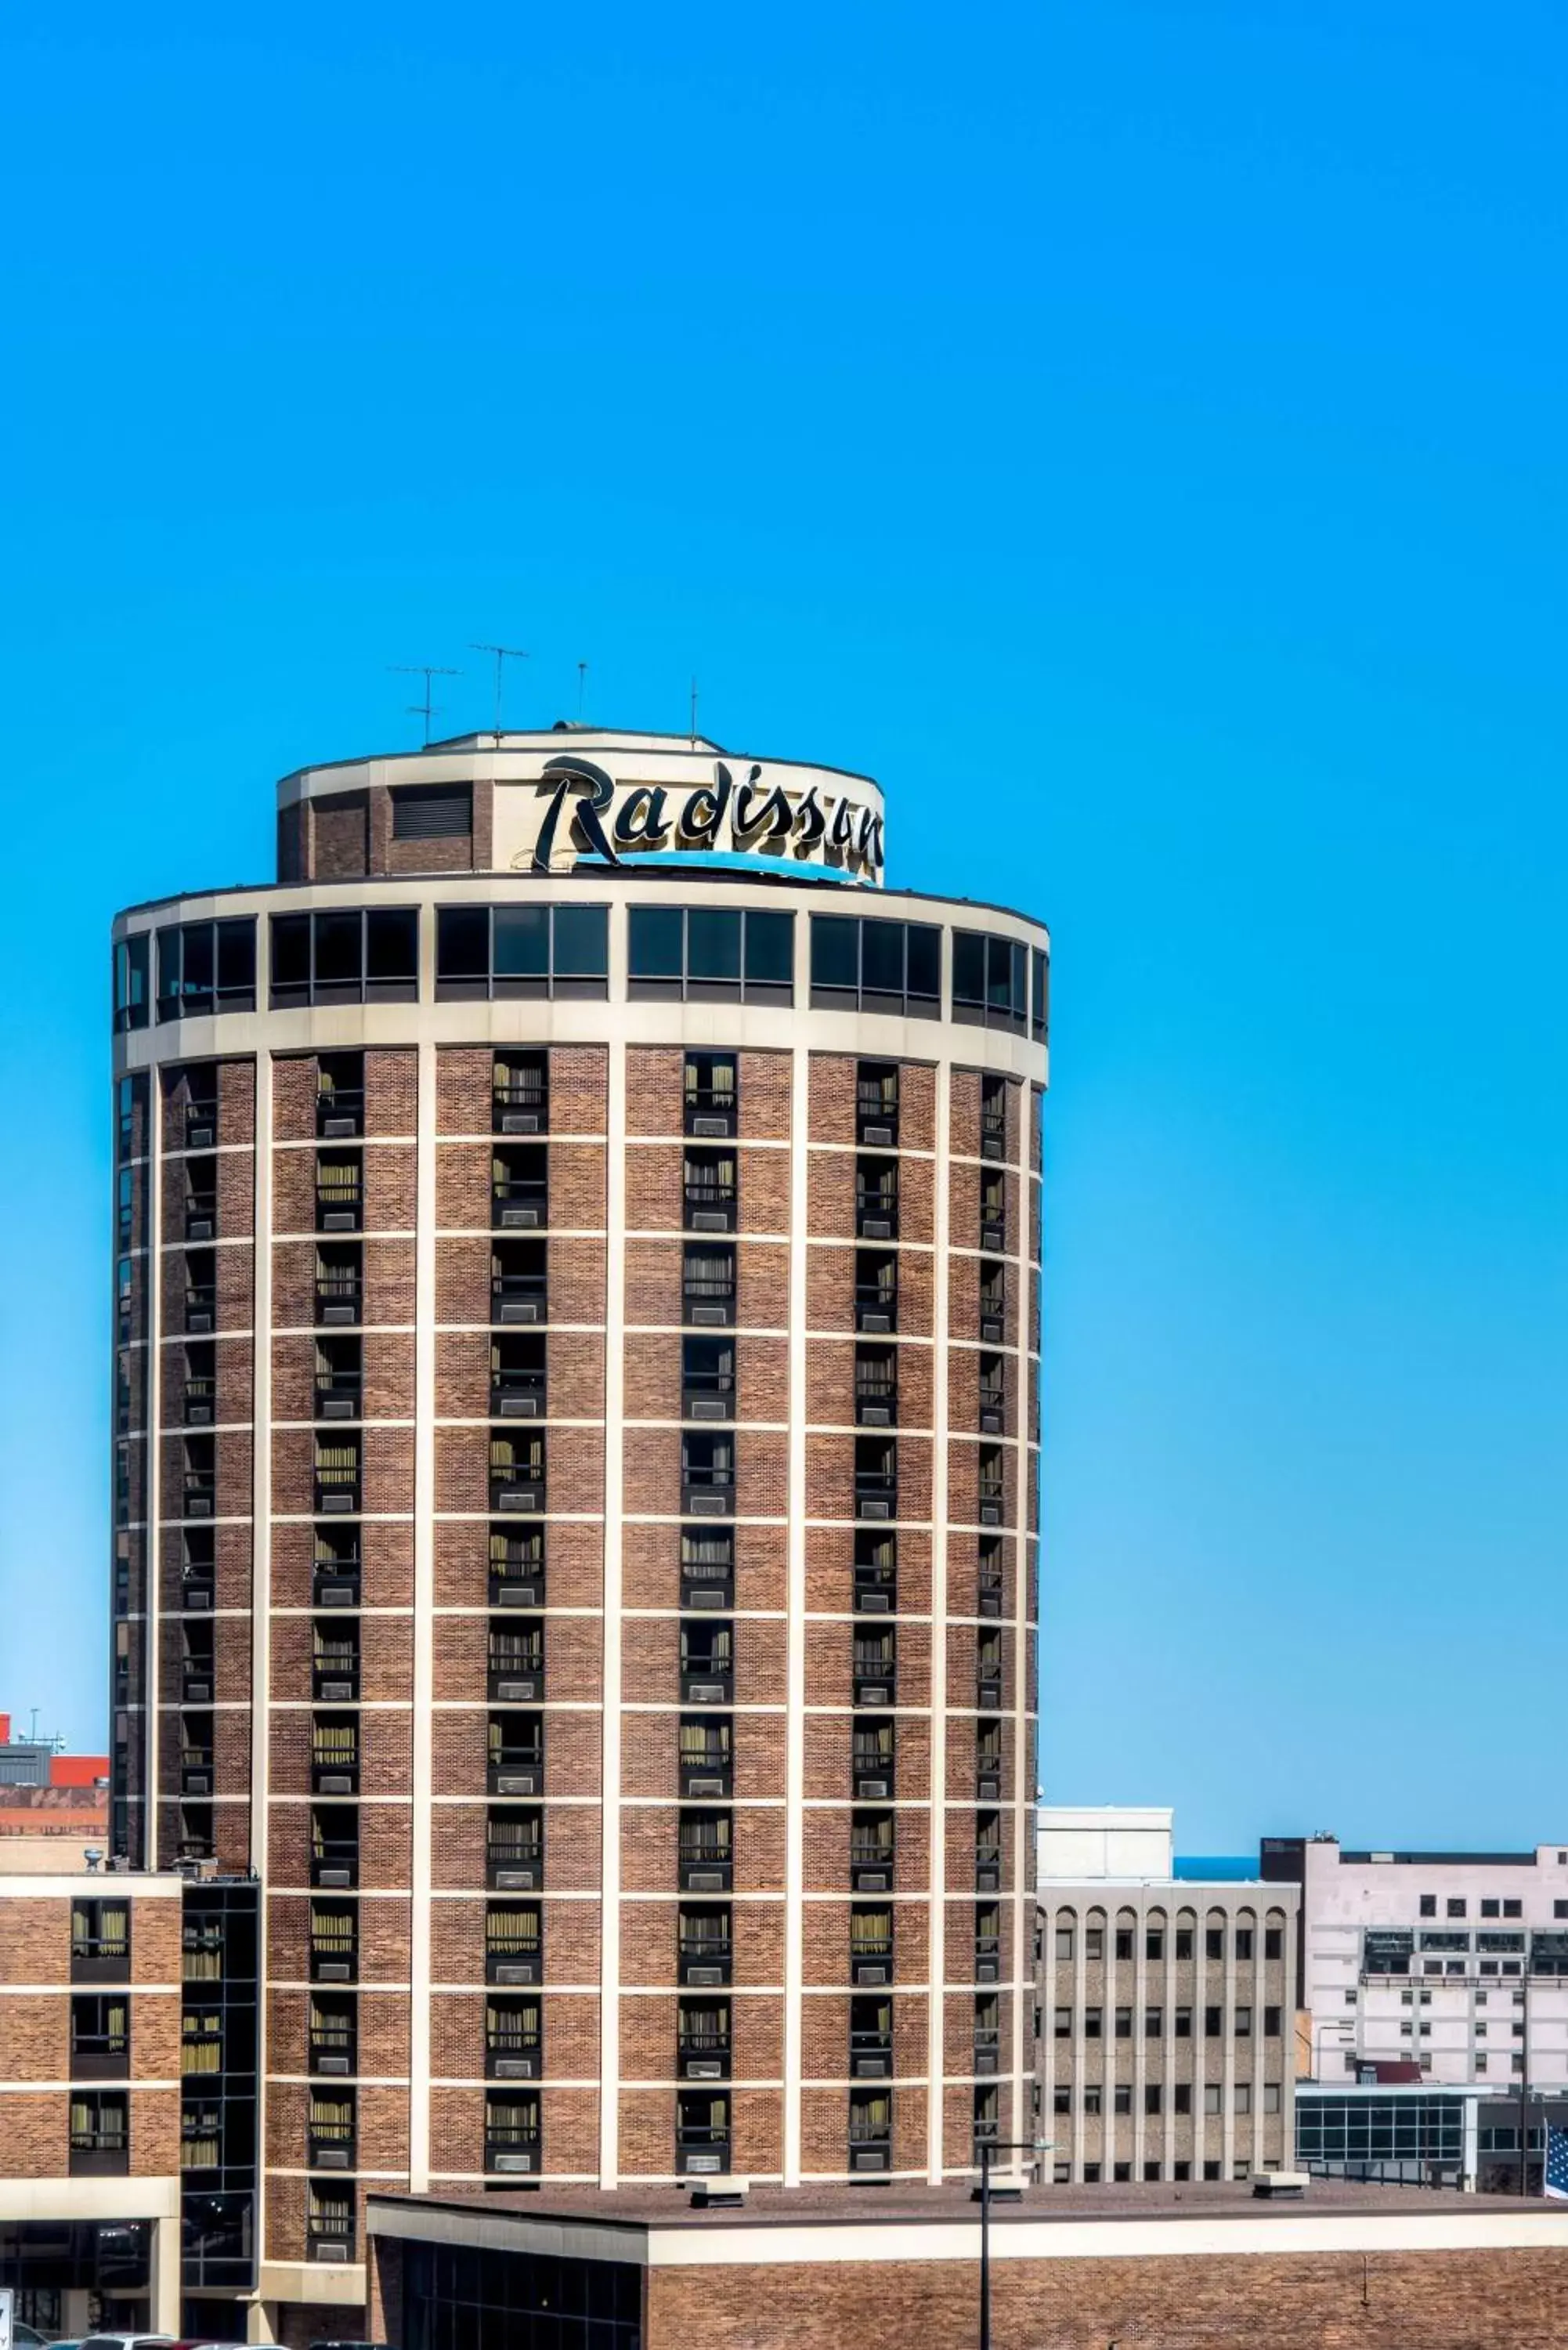 Property Building in Radisson Hotel Duluth-Harborview